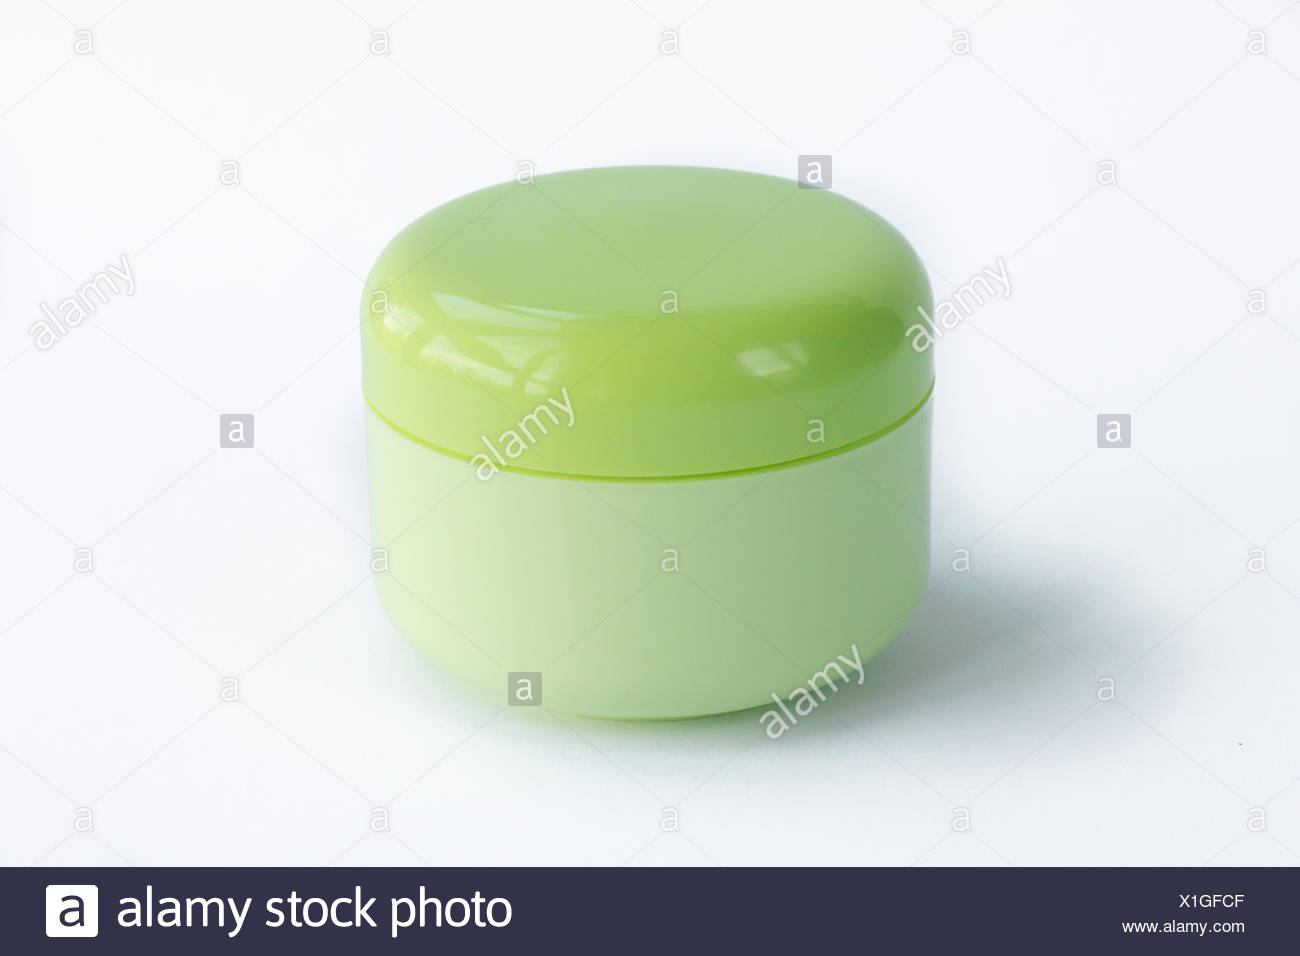 Download Green Yellow Cosmetic Bottle Isolated On White Background Stock Photo Alamy Yellowimages Mockups